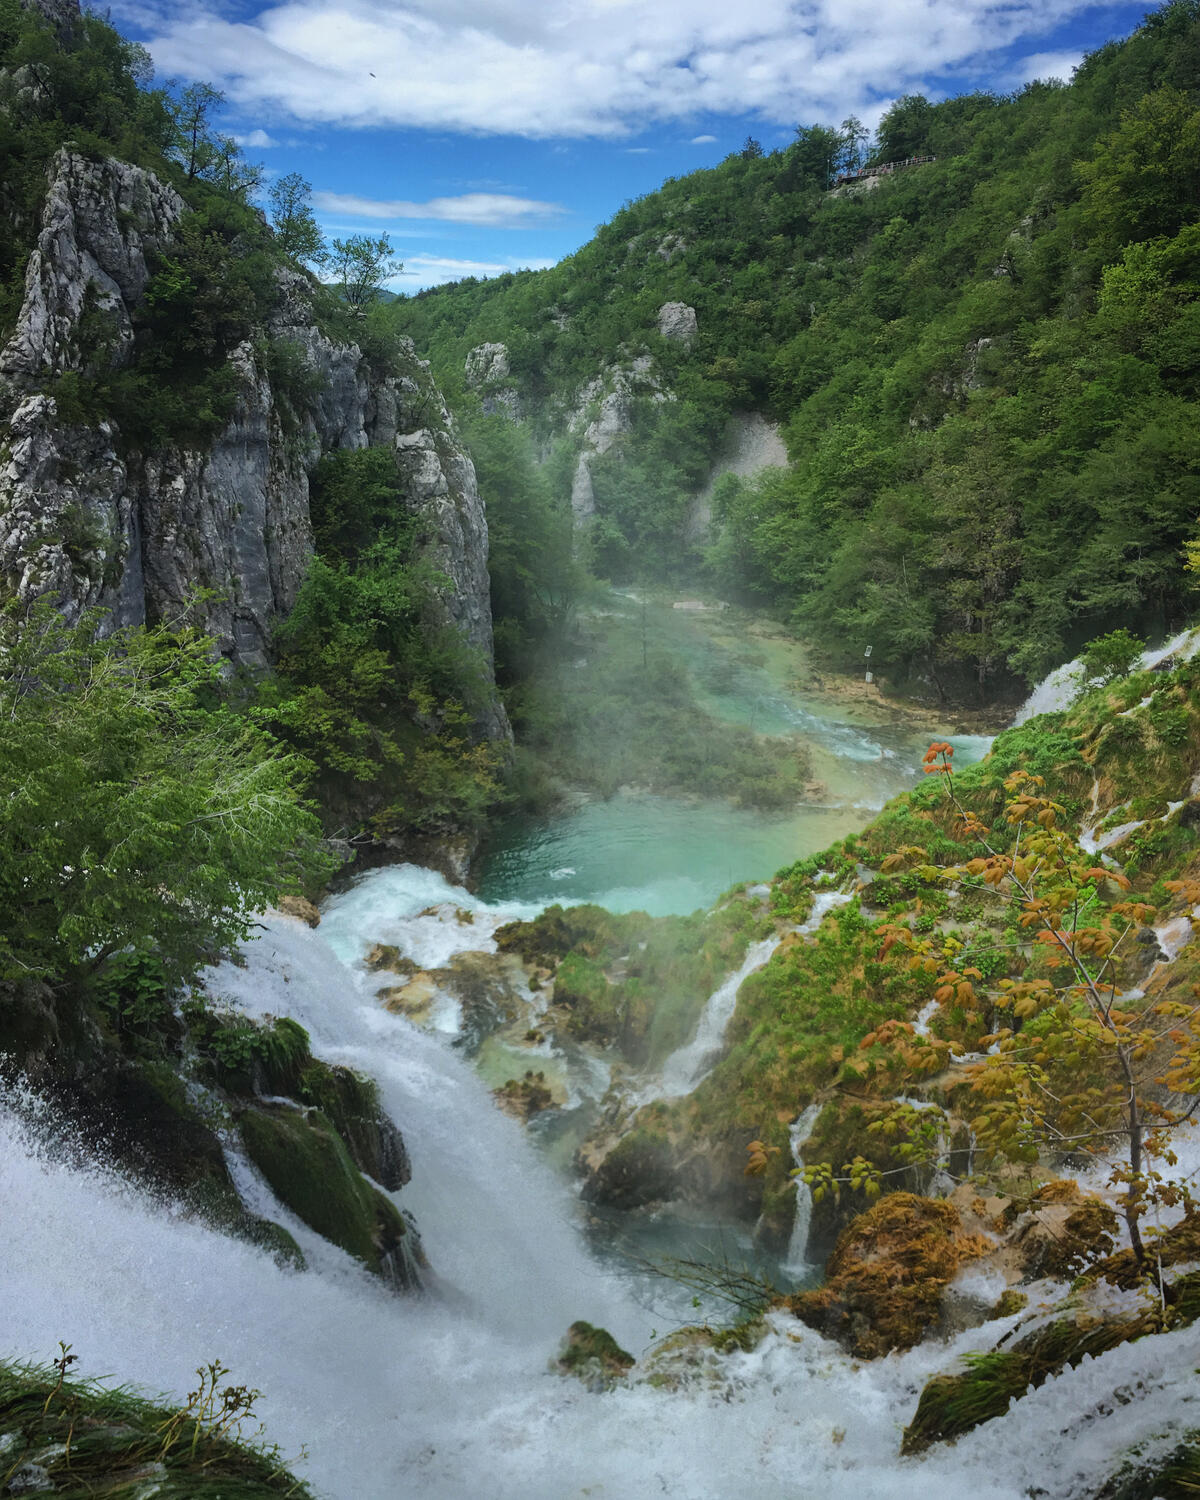 A river with rapids in a gorge of mountains